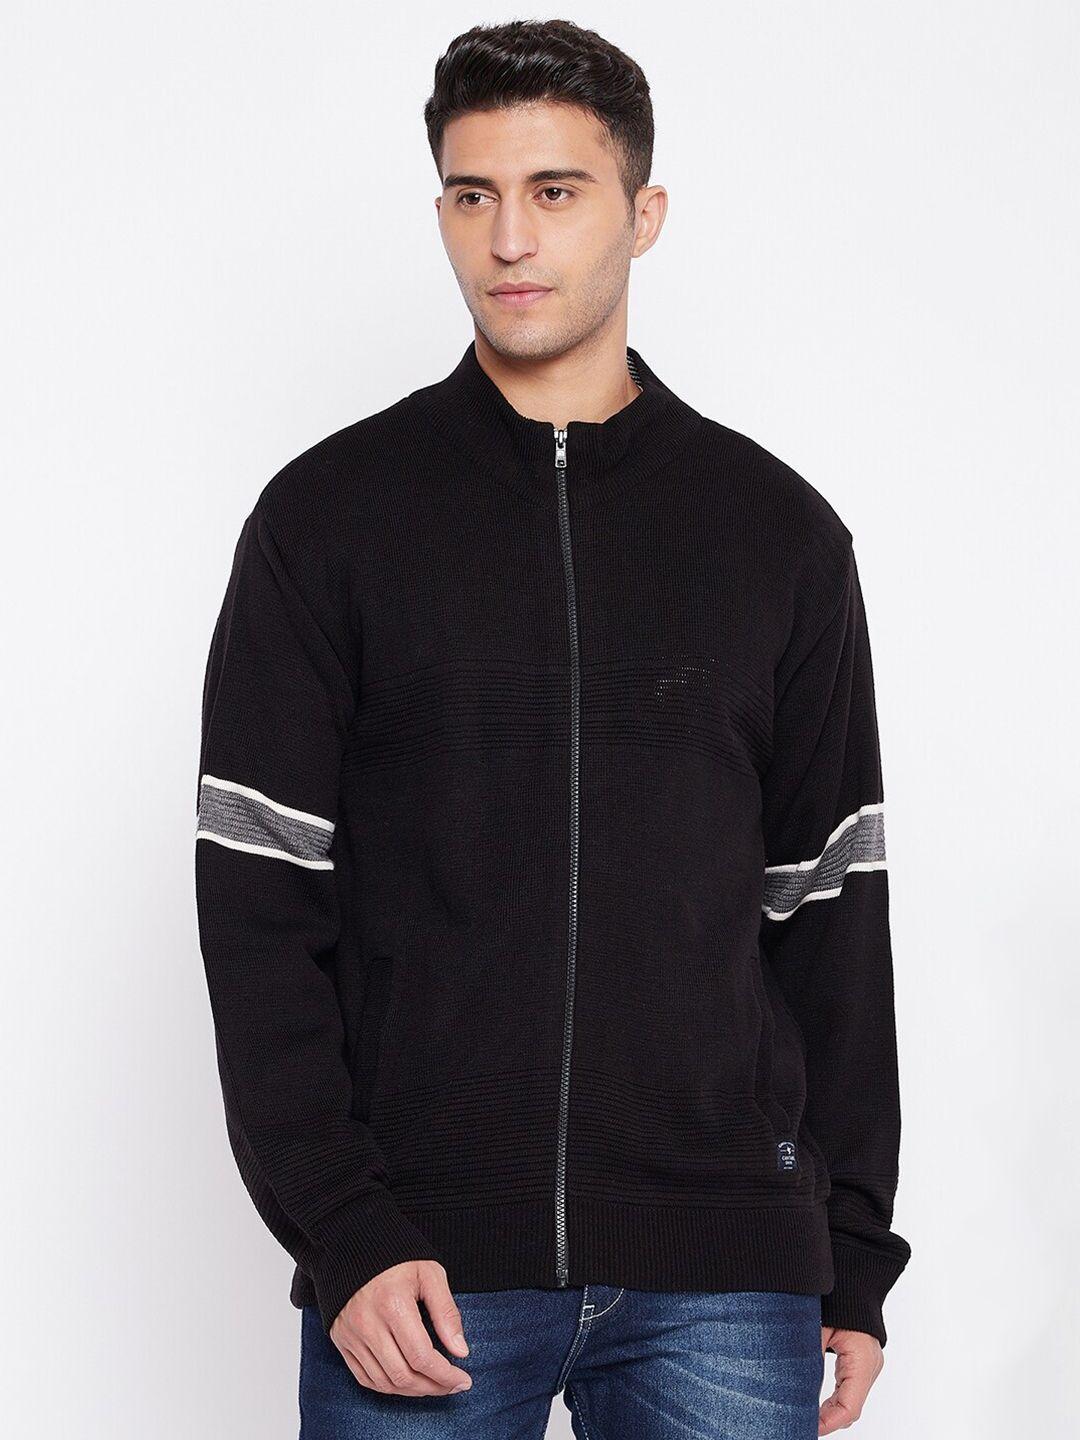 cantabil-men-black-&-grey-striped-front-open-with-zip-detail